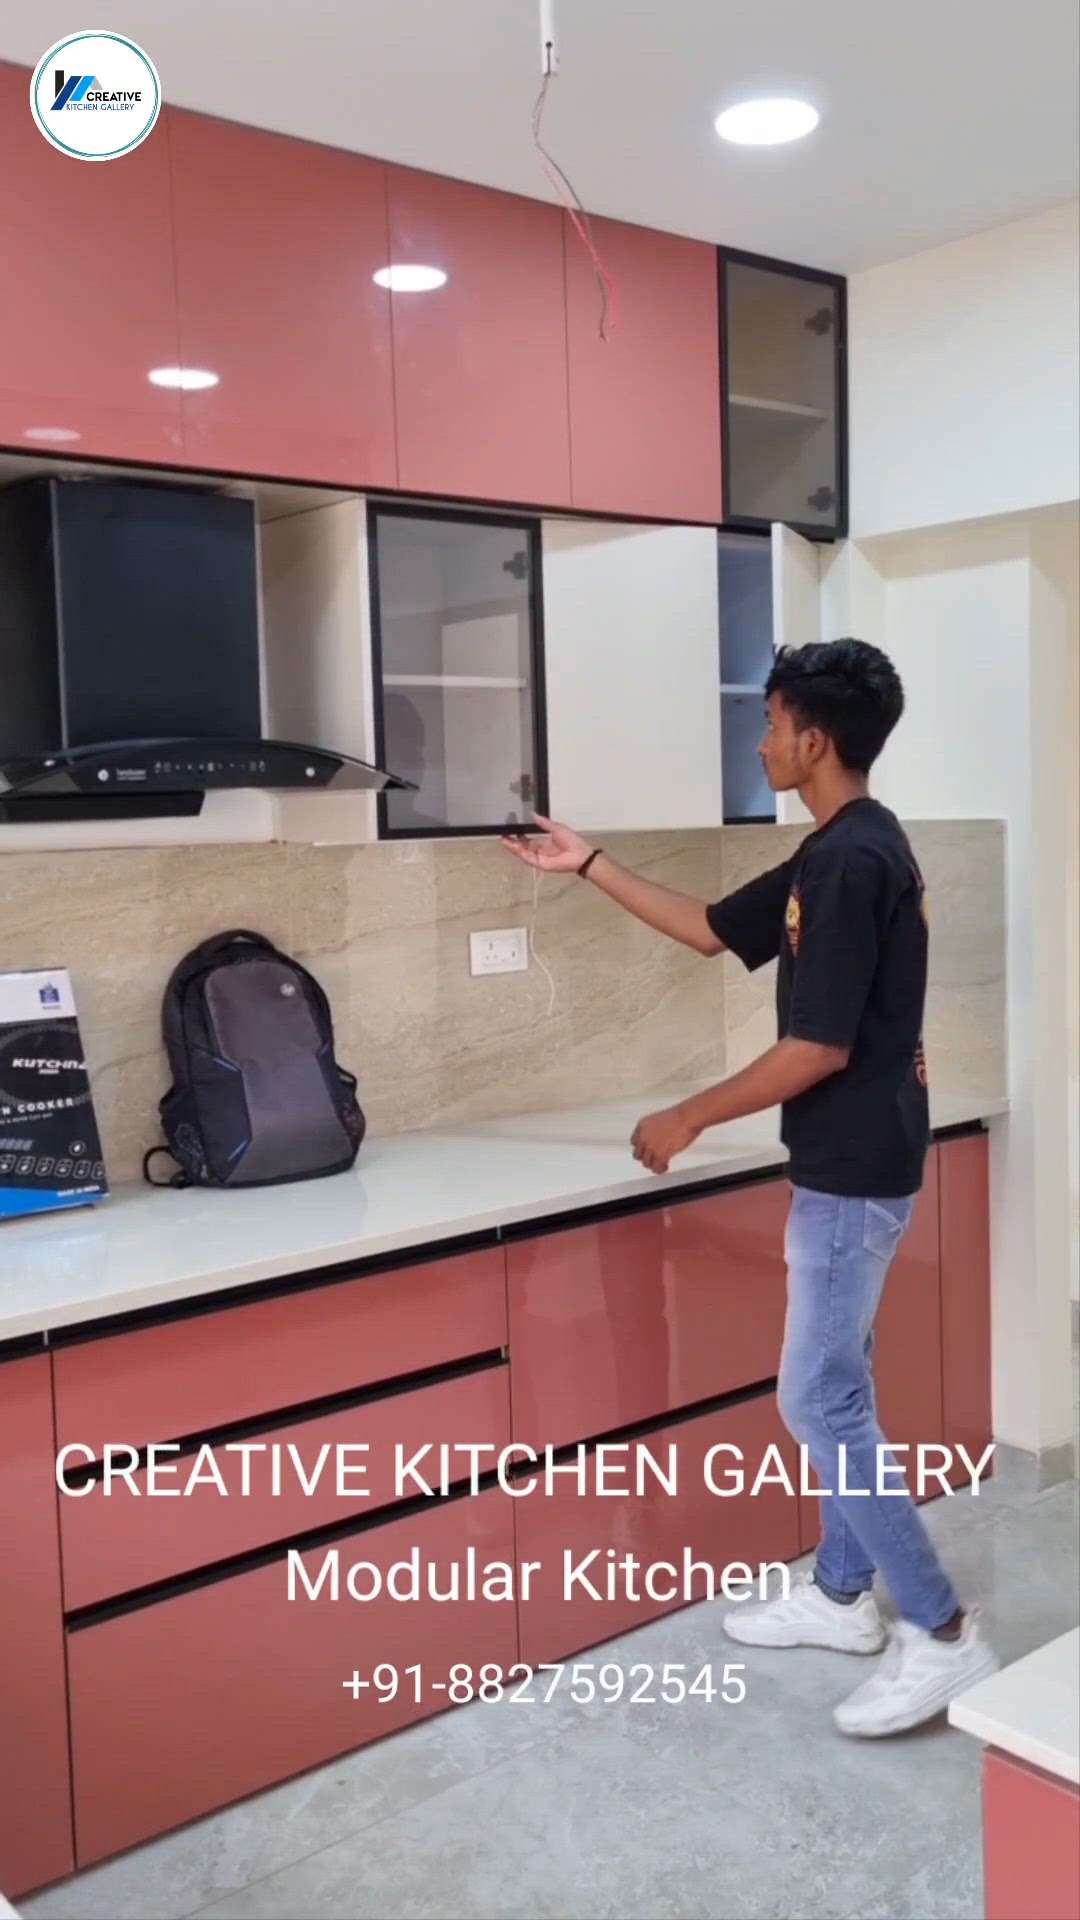 This Modular kitchen completes in only *4* days. Manufactured by Creative Kitchen Gallery, INDORE 
Any Enquiry call Now at +91-8827592545.
8 feet x 10 feet L-Shape modular kitchen With Dry platform.  
Design & manufacturing By @creativekitchengallery Indore
CUSTOMER:- Shailendra Jain  
CARCASS:- HDHMR
FINISHES:- UV FINISH @ action_tesa 
HARDWARE:- @OLIVE
APPLIANCES :-  @HINDWARE_CHIMNEY
SITE ADDRESS:- SHEHNAI RESIDENCY , Indore #ModularKitchen